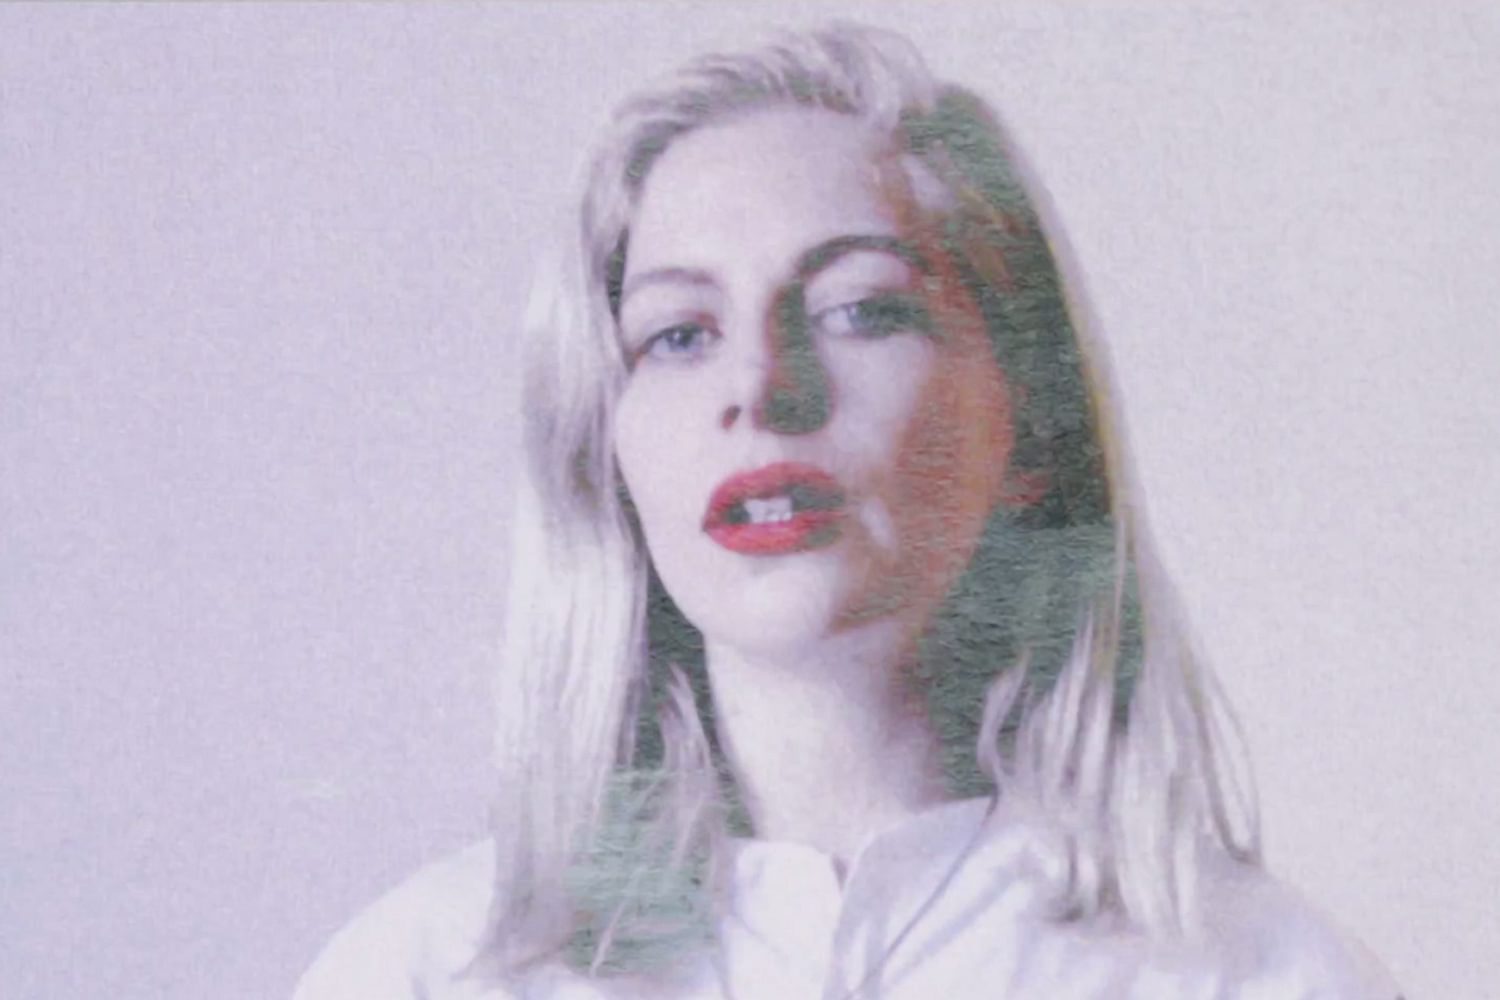 Alvvays unveil collage video for new single, ‘Next of Kin’